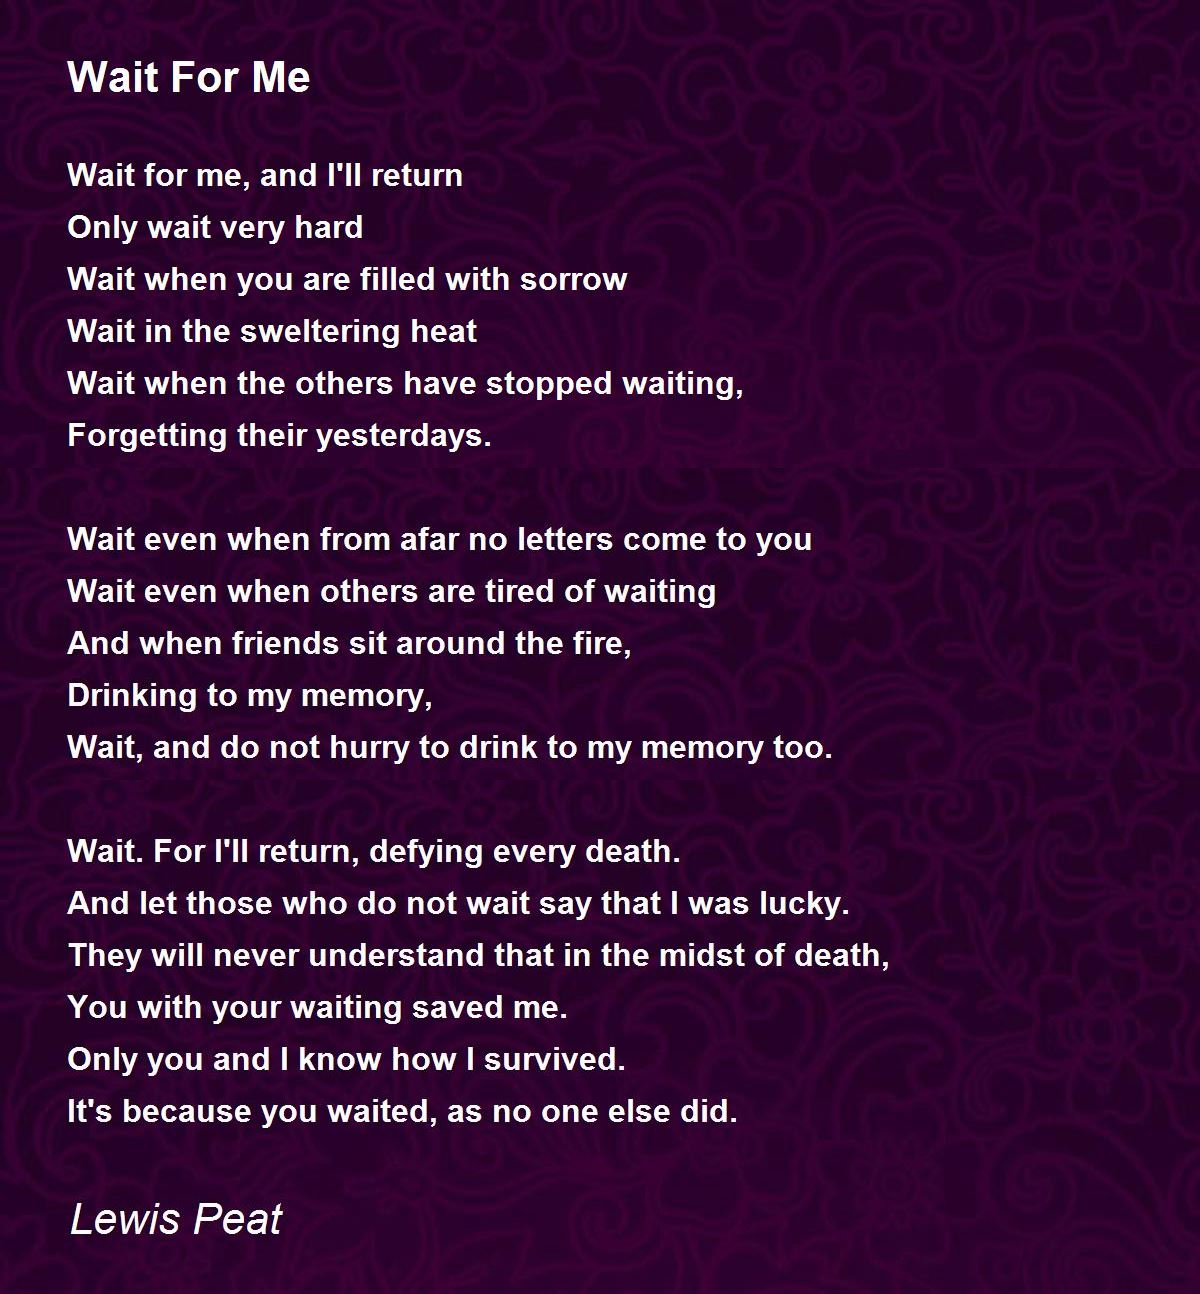 Wait For Me - Wait For Me Poem by Lewis Peat